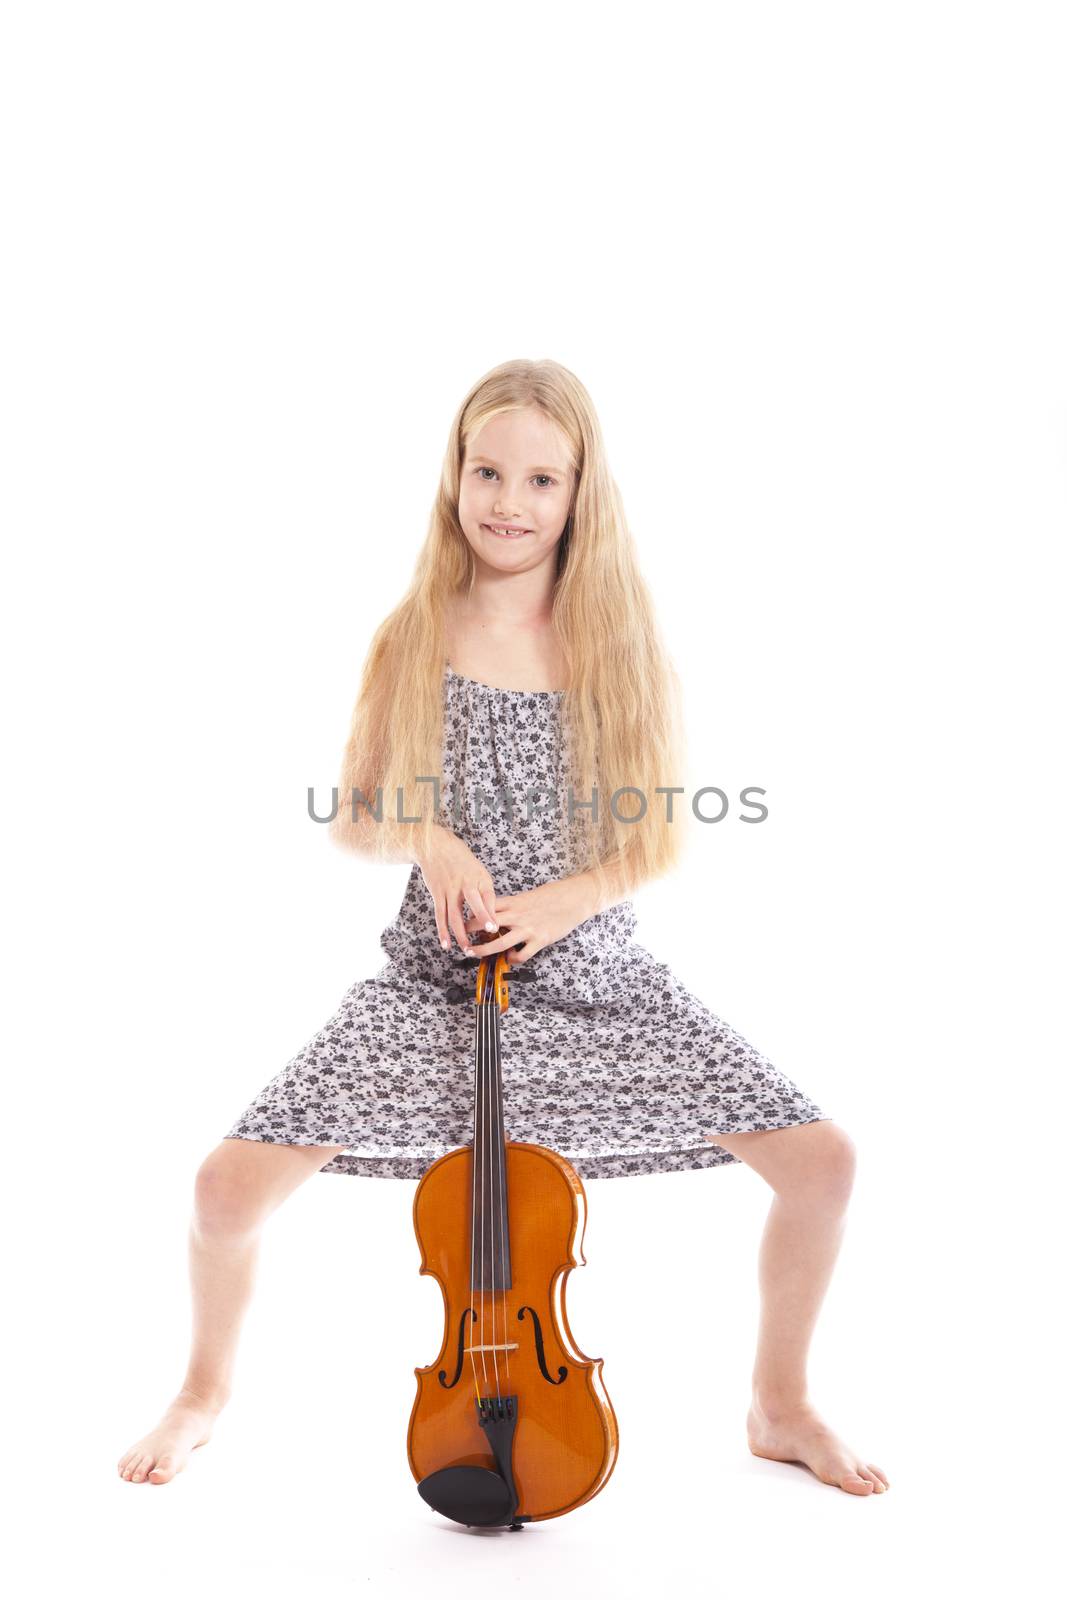 young girl in dress standing with her violin against white background